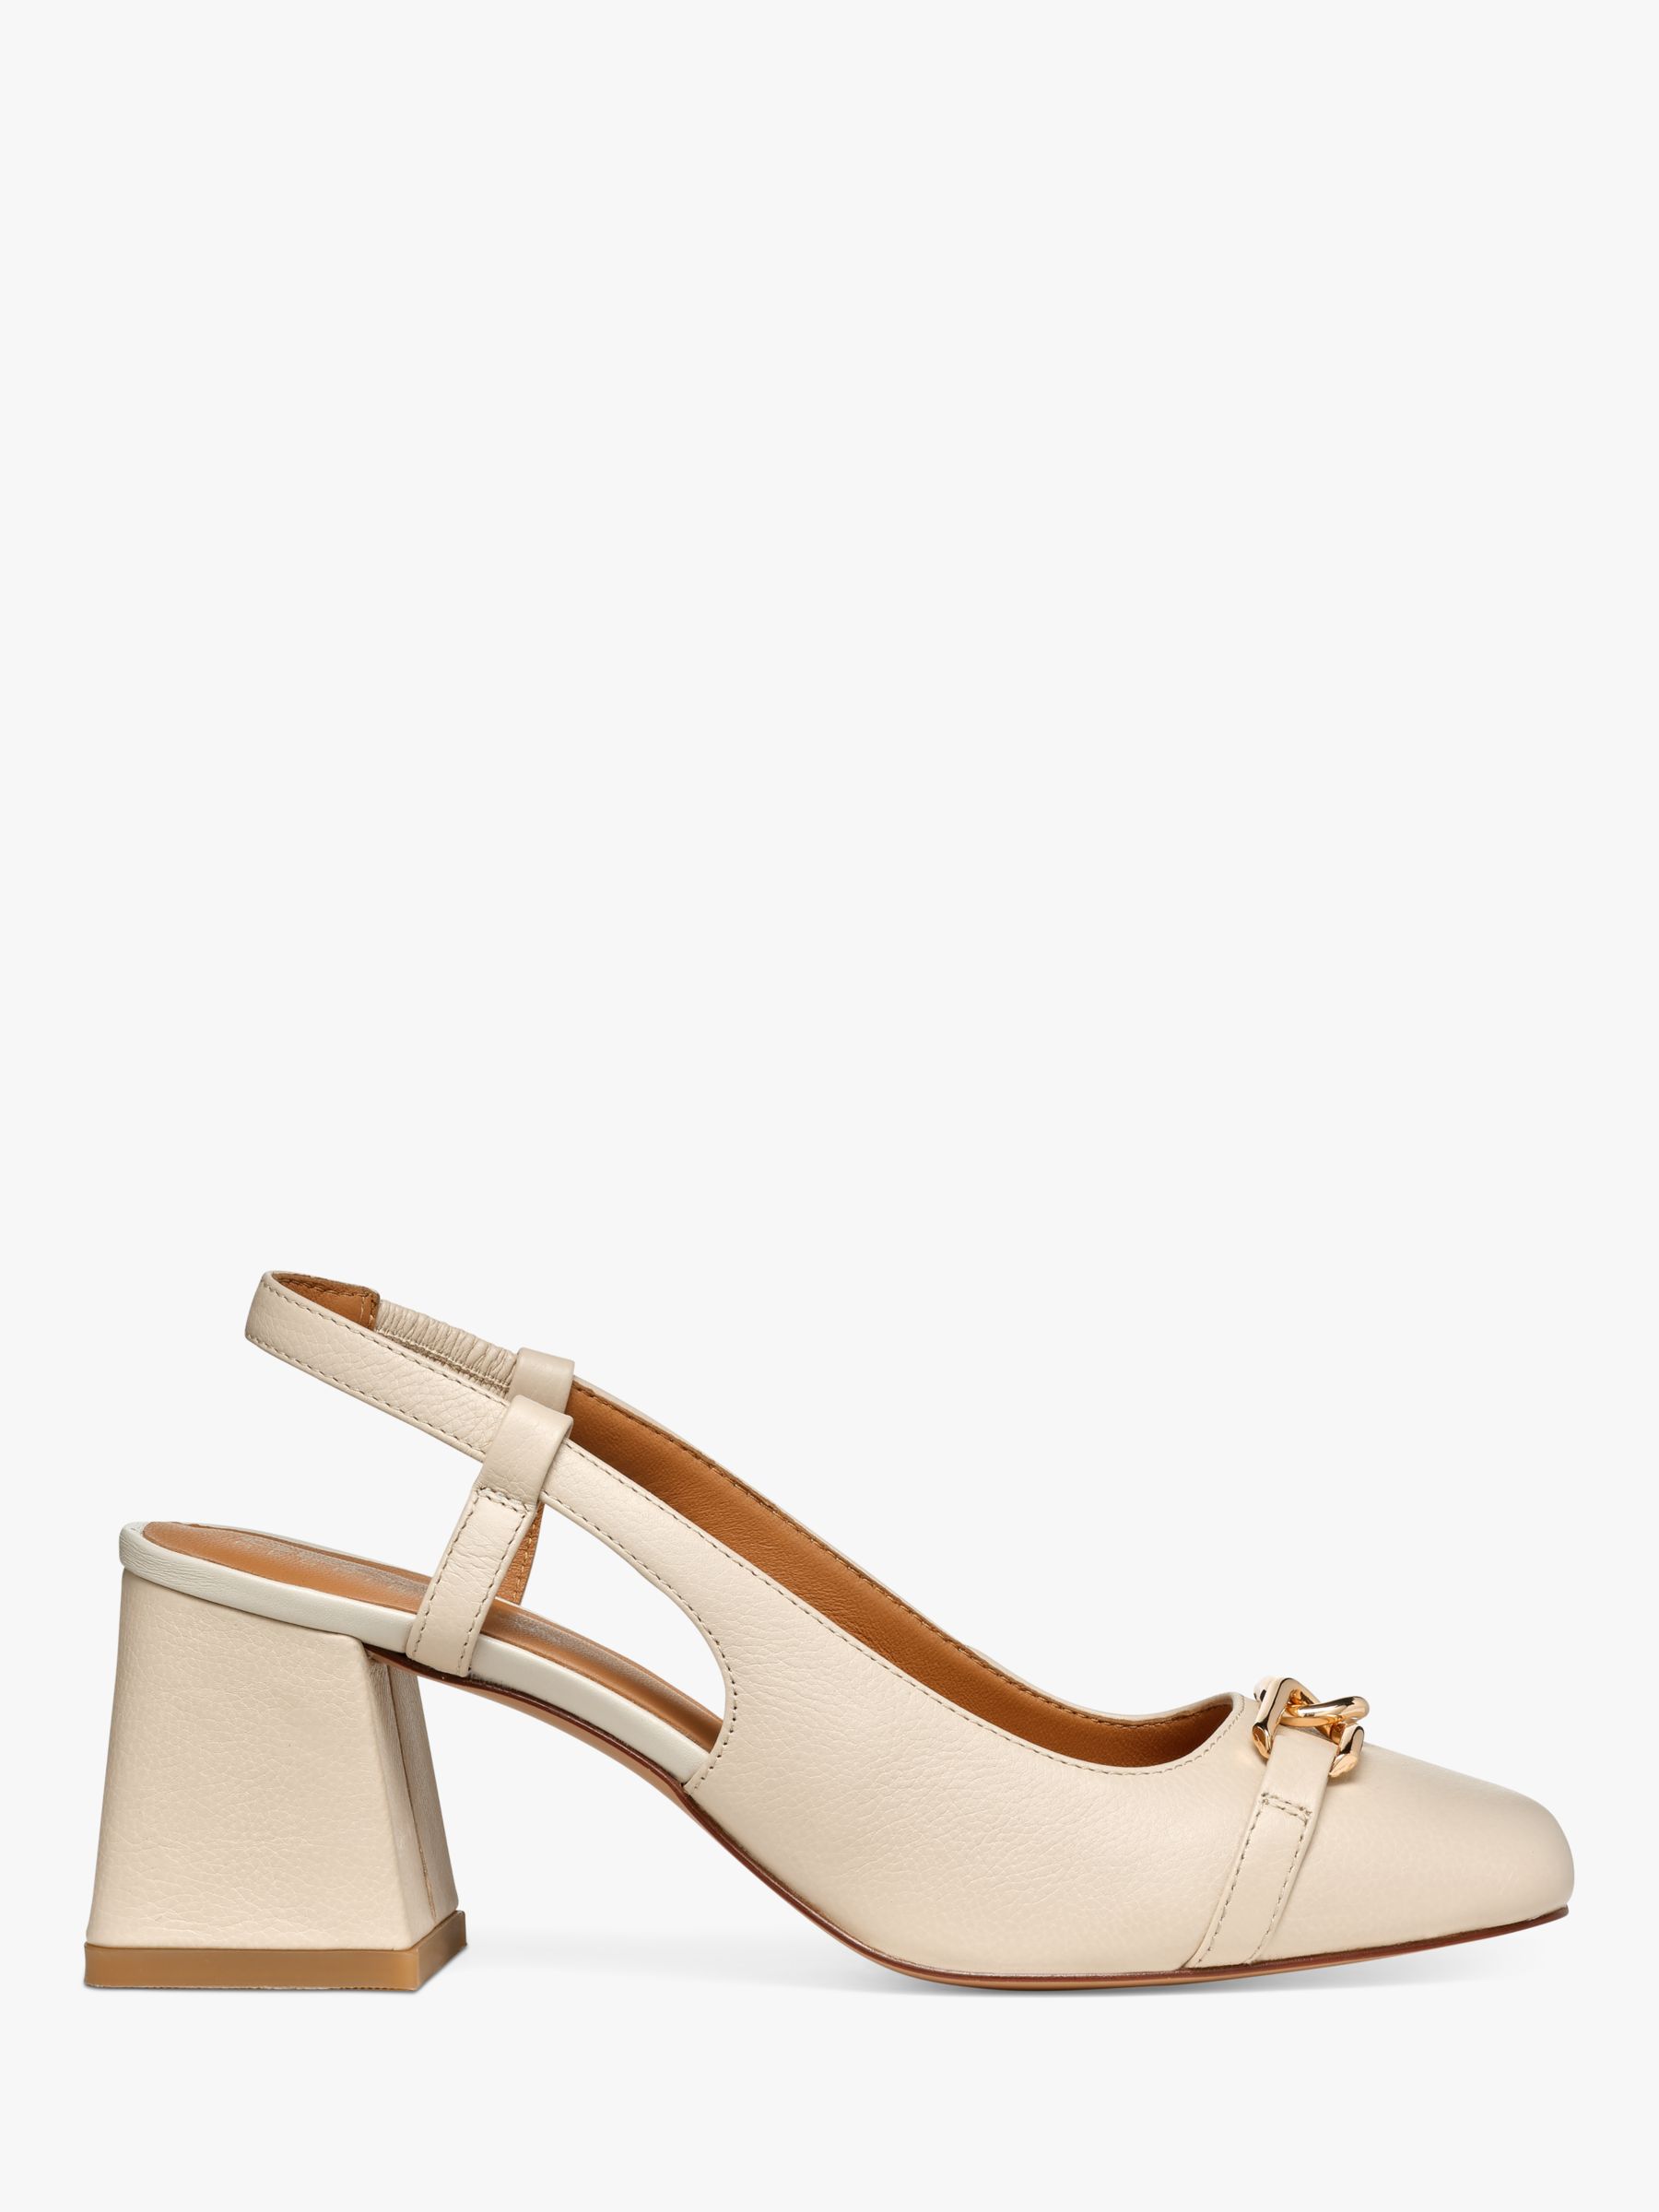 Geox Coronilla Square Toe Leather Slingback Court Shoes, Lt Sand at ...